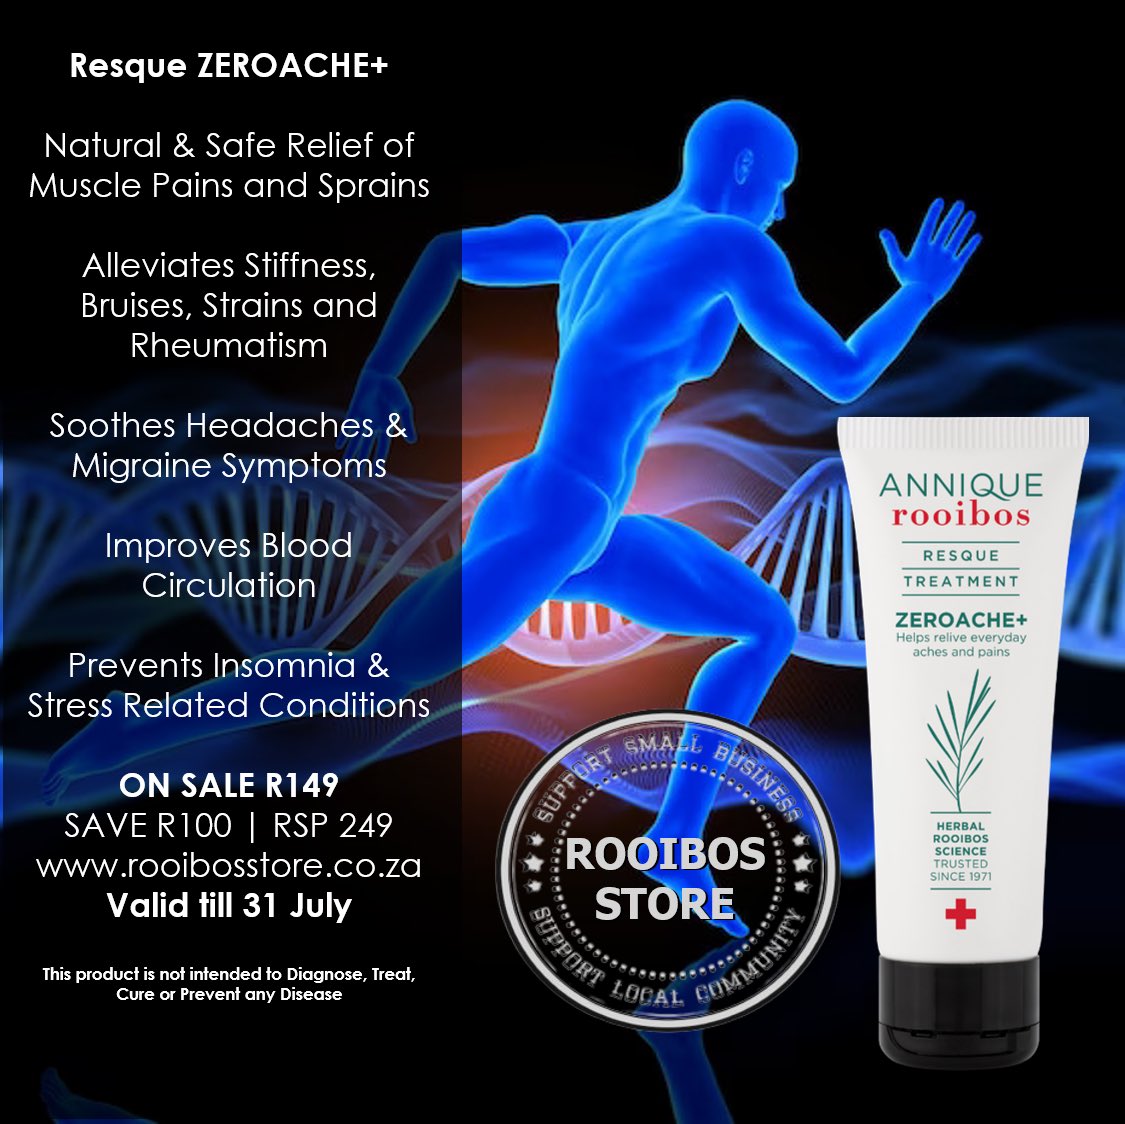 Resque ZeroAche+ has been formulated with natural ingredients and Rooibos extract to help provide relief from muscle aches, stiffness, sprains, bruises, strains and rheumatism
https://t.co/99NibbrTRO
#Annique #SouthAfrica #Snowfall https://t.co/NBCL0HGS87